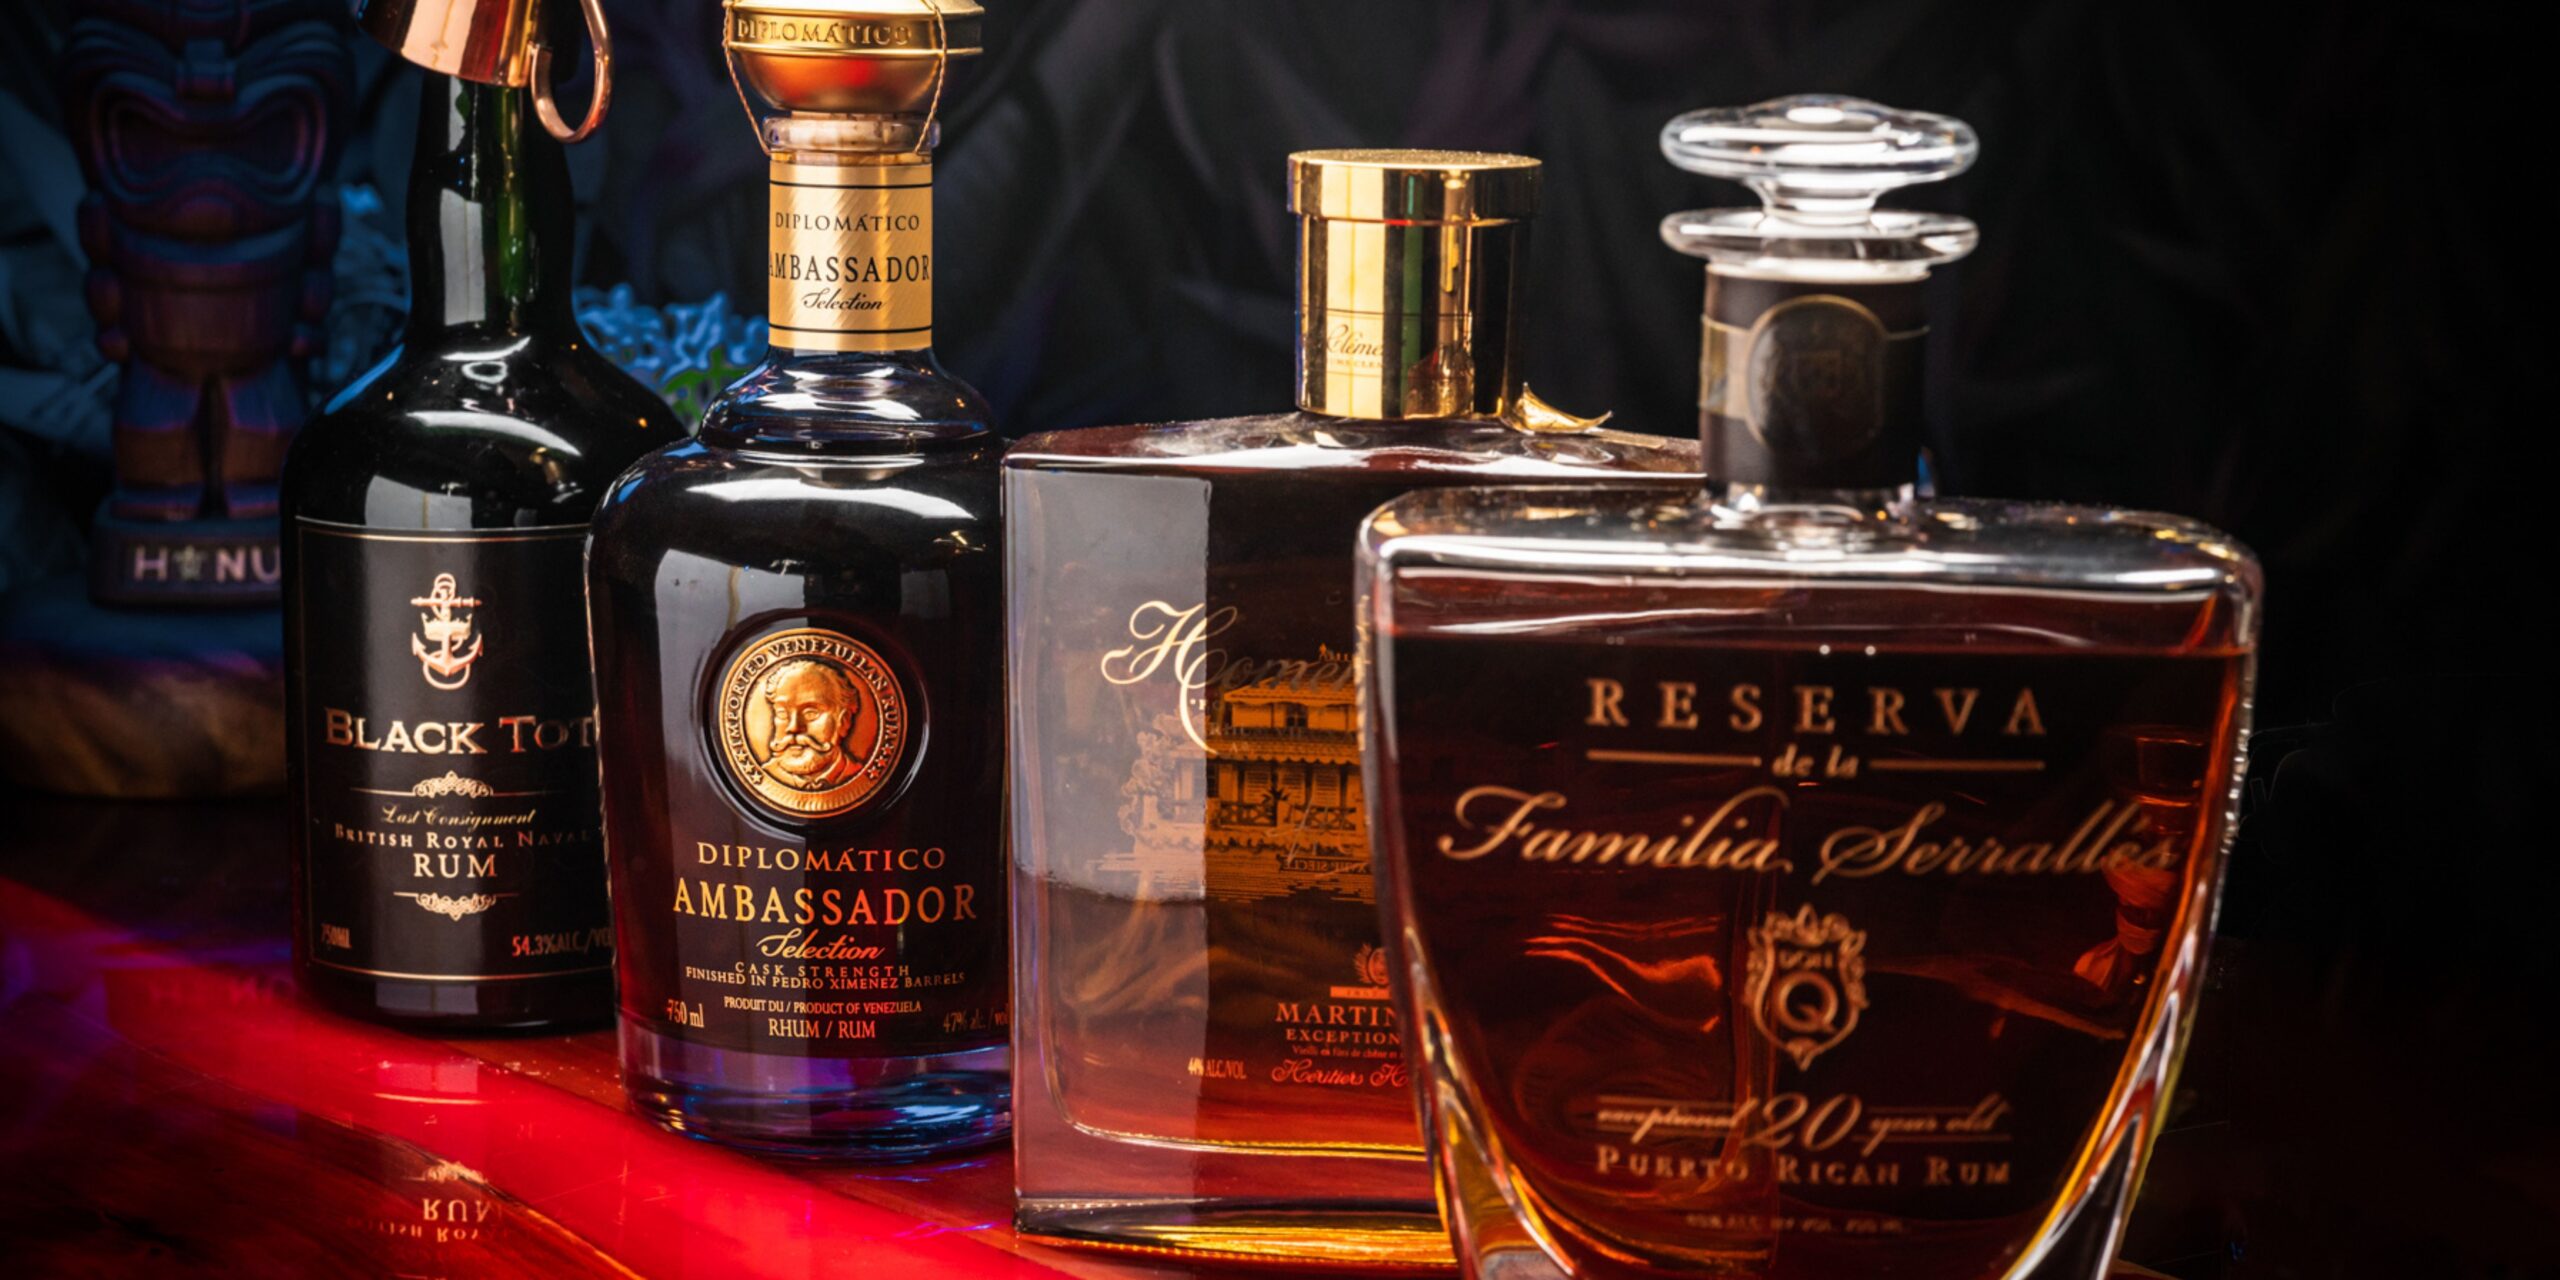 expensive and exclusive rum bottles